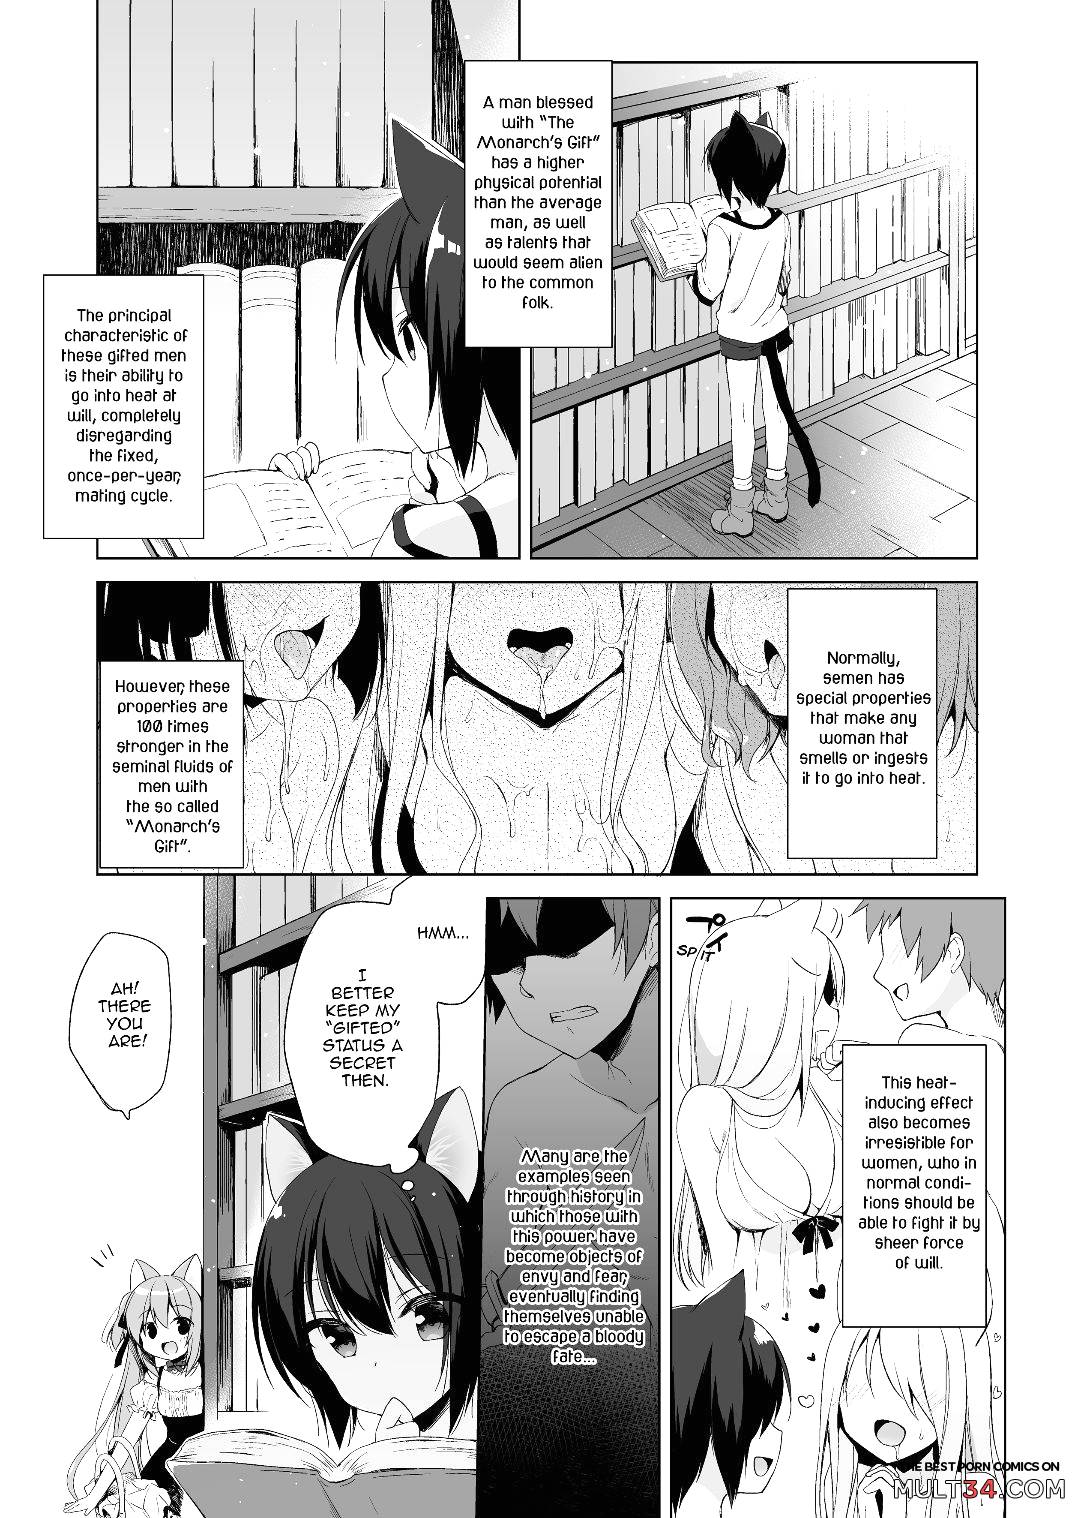 My Ideal Life in Another World 2 page 4